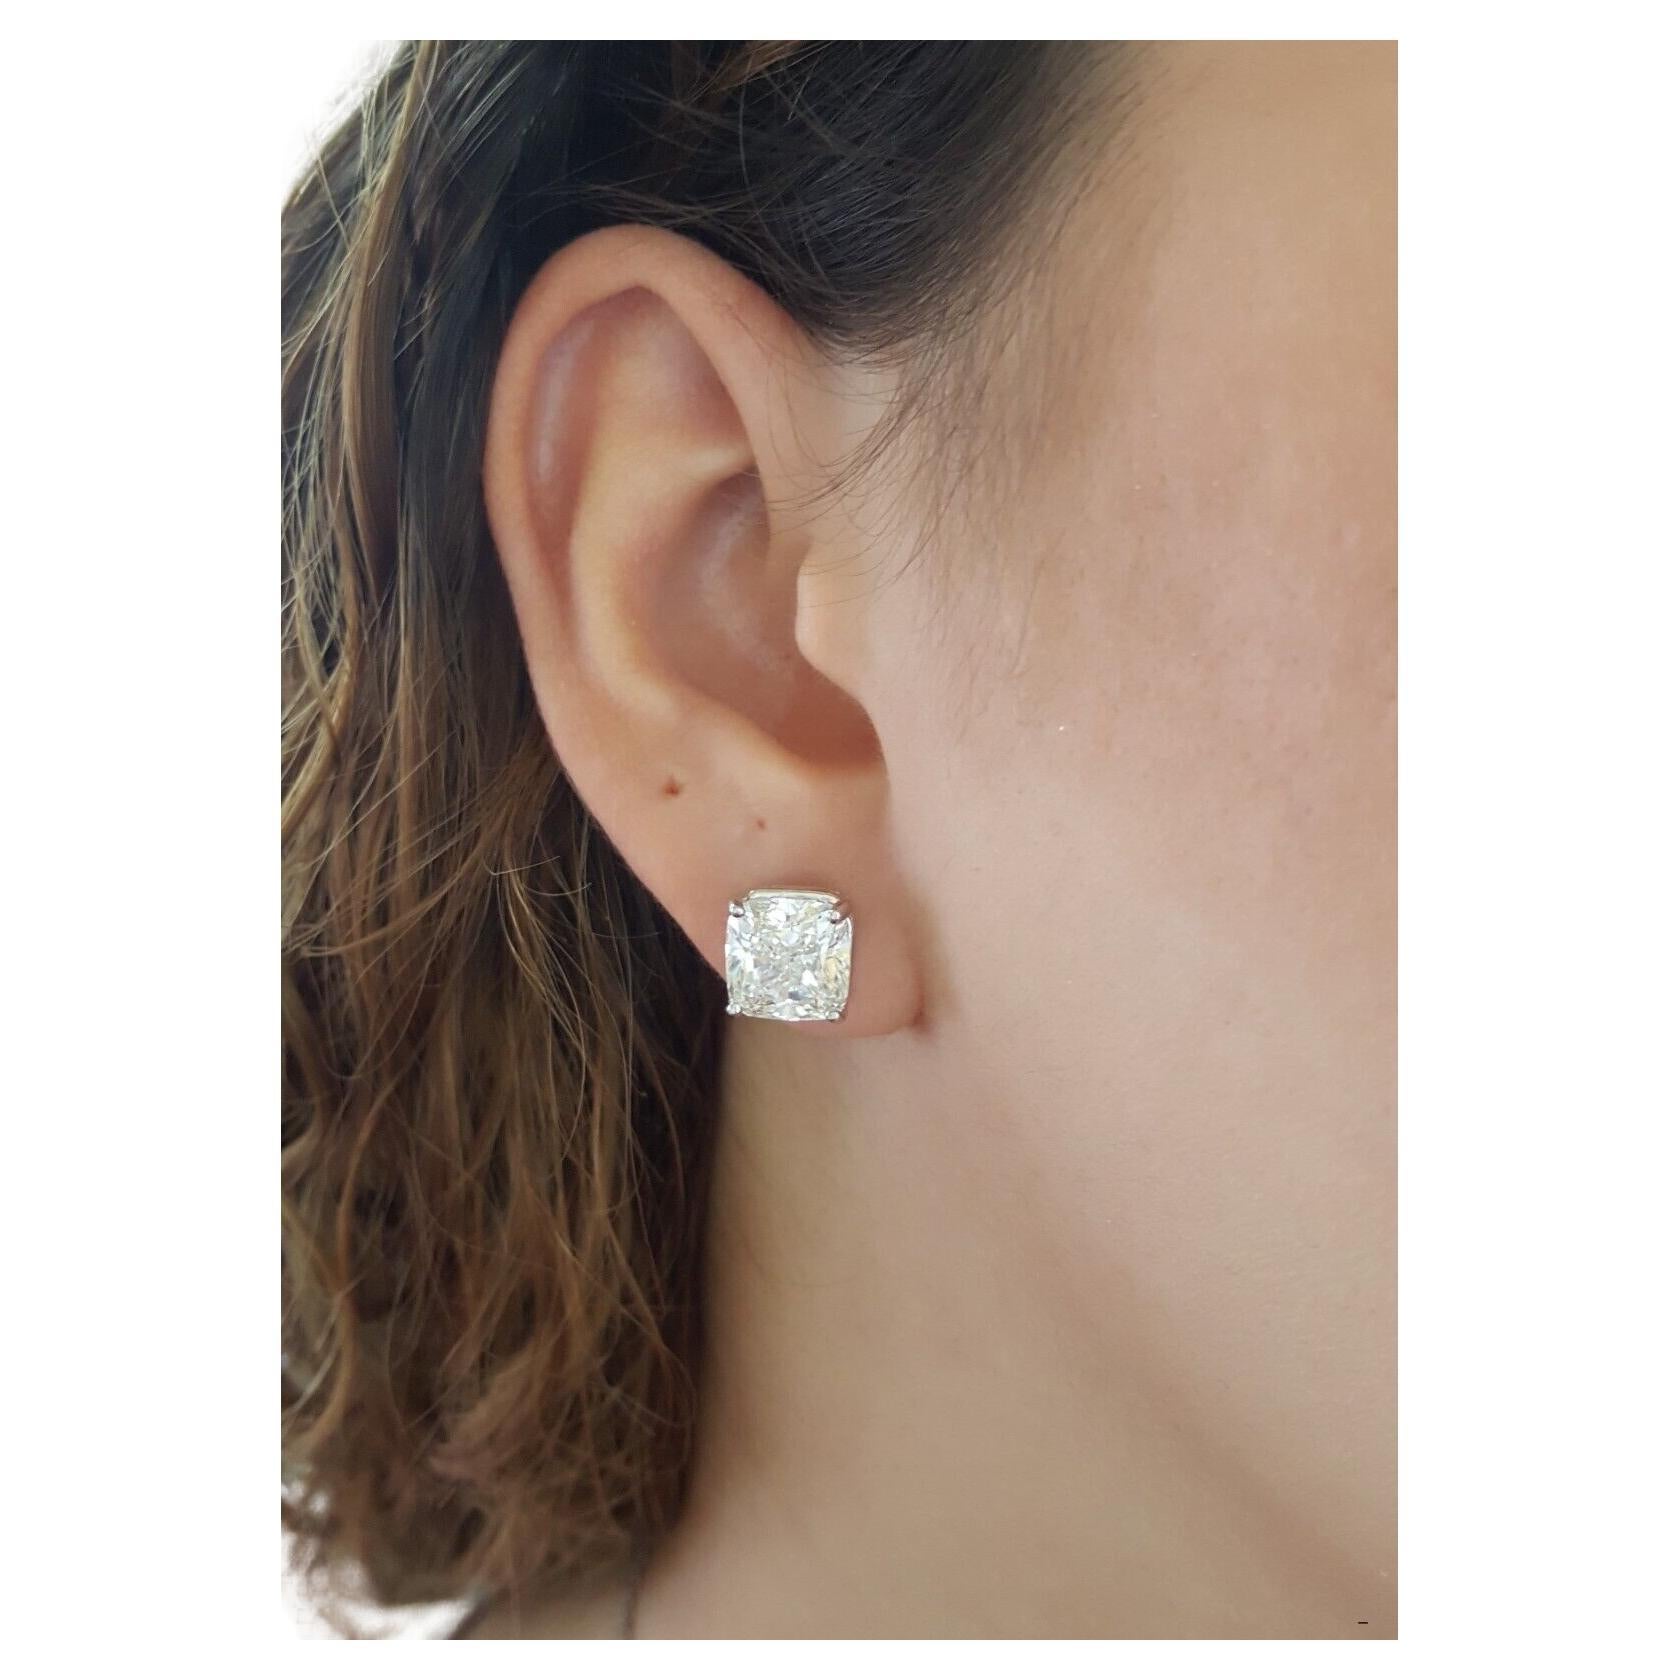 Elevate your style with these exquisite platinum stud earrings, each adorned with a remarkable 4-carat diamond of J color and VS2 clarity. The timeless elegance of these earrings is unparalleled, making them the perfect accessory for any special